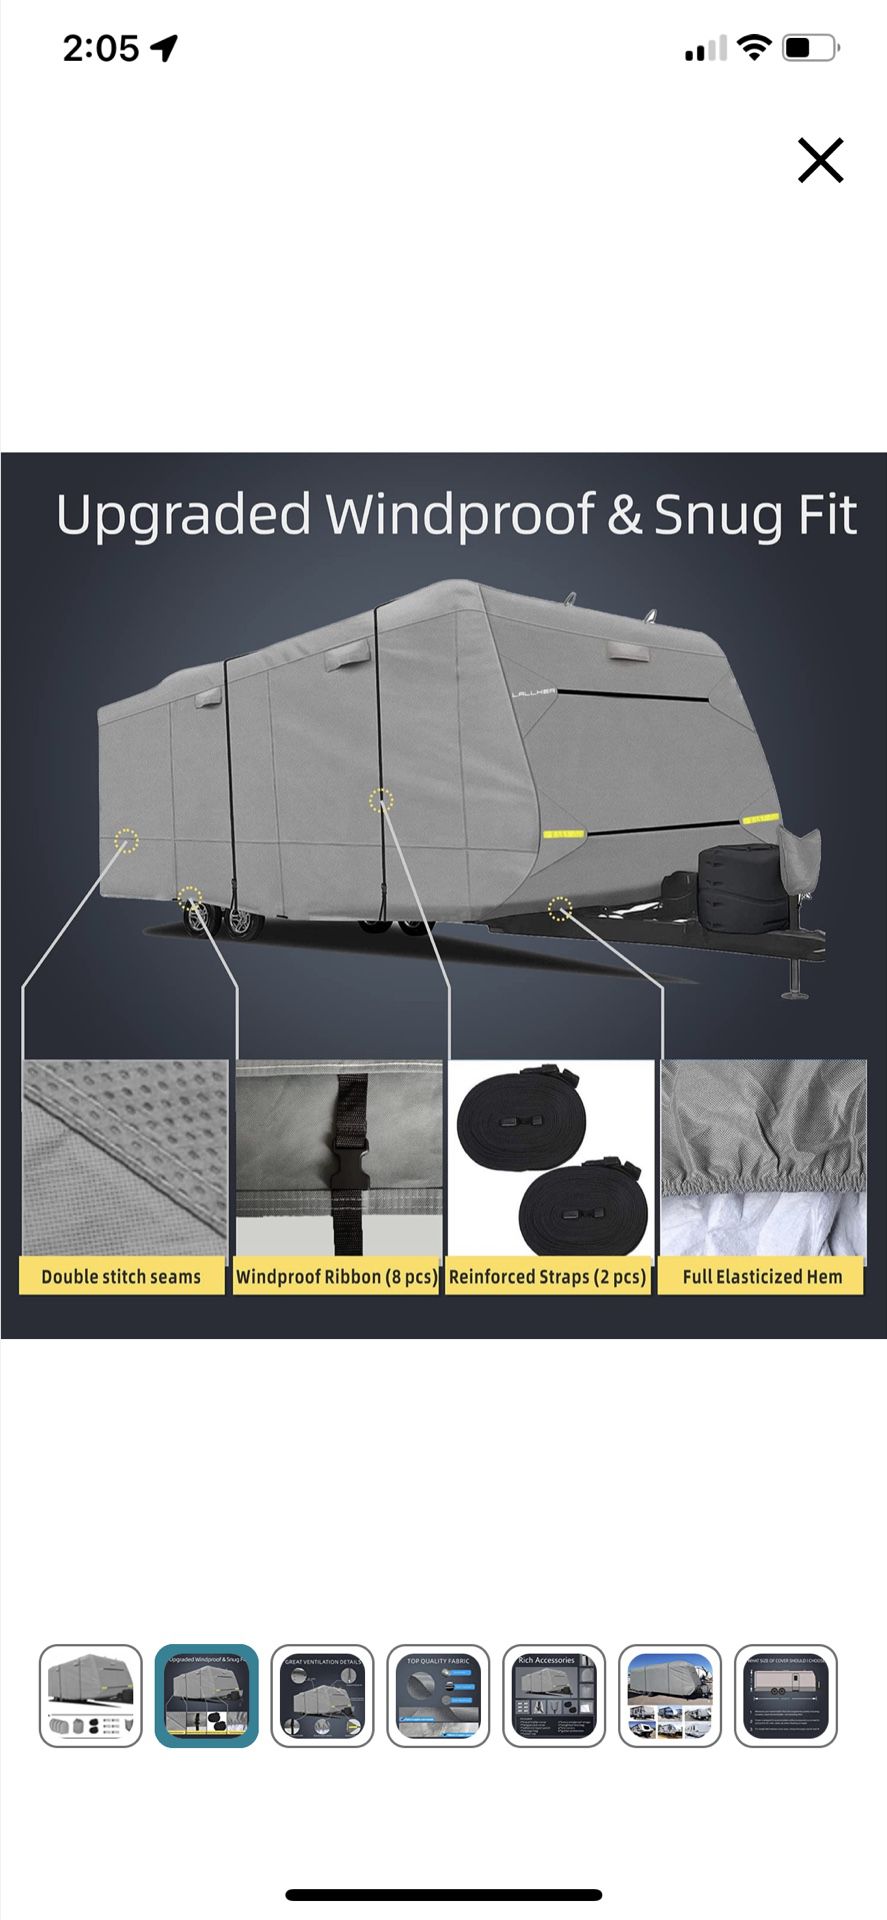 Brand new Lallker Travel Trailer RV Cover - Upgraded Heavy Duty 6 Layers Top Windproof Waterproof Sun Protection Camper RV Cover for 20'1" - 22' RV 